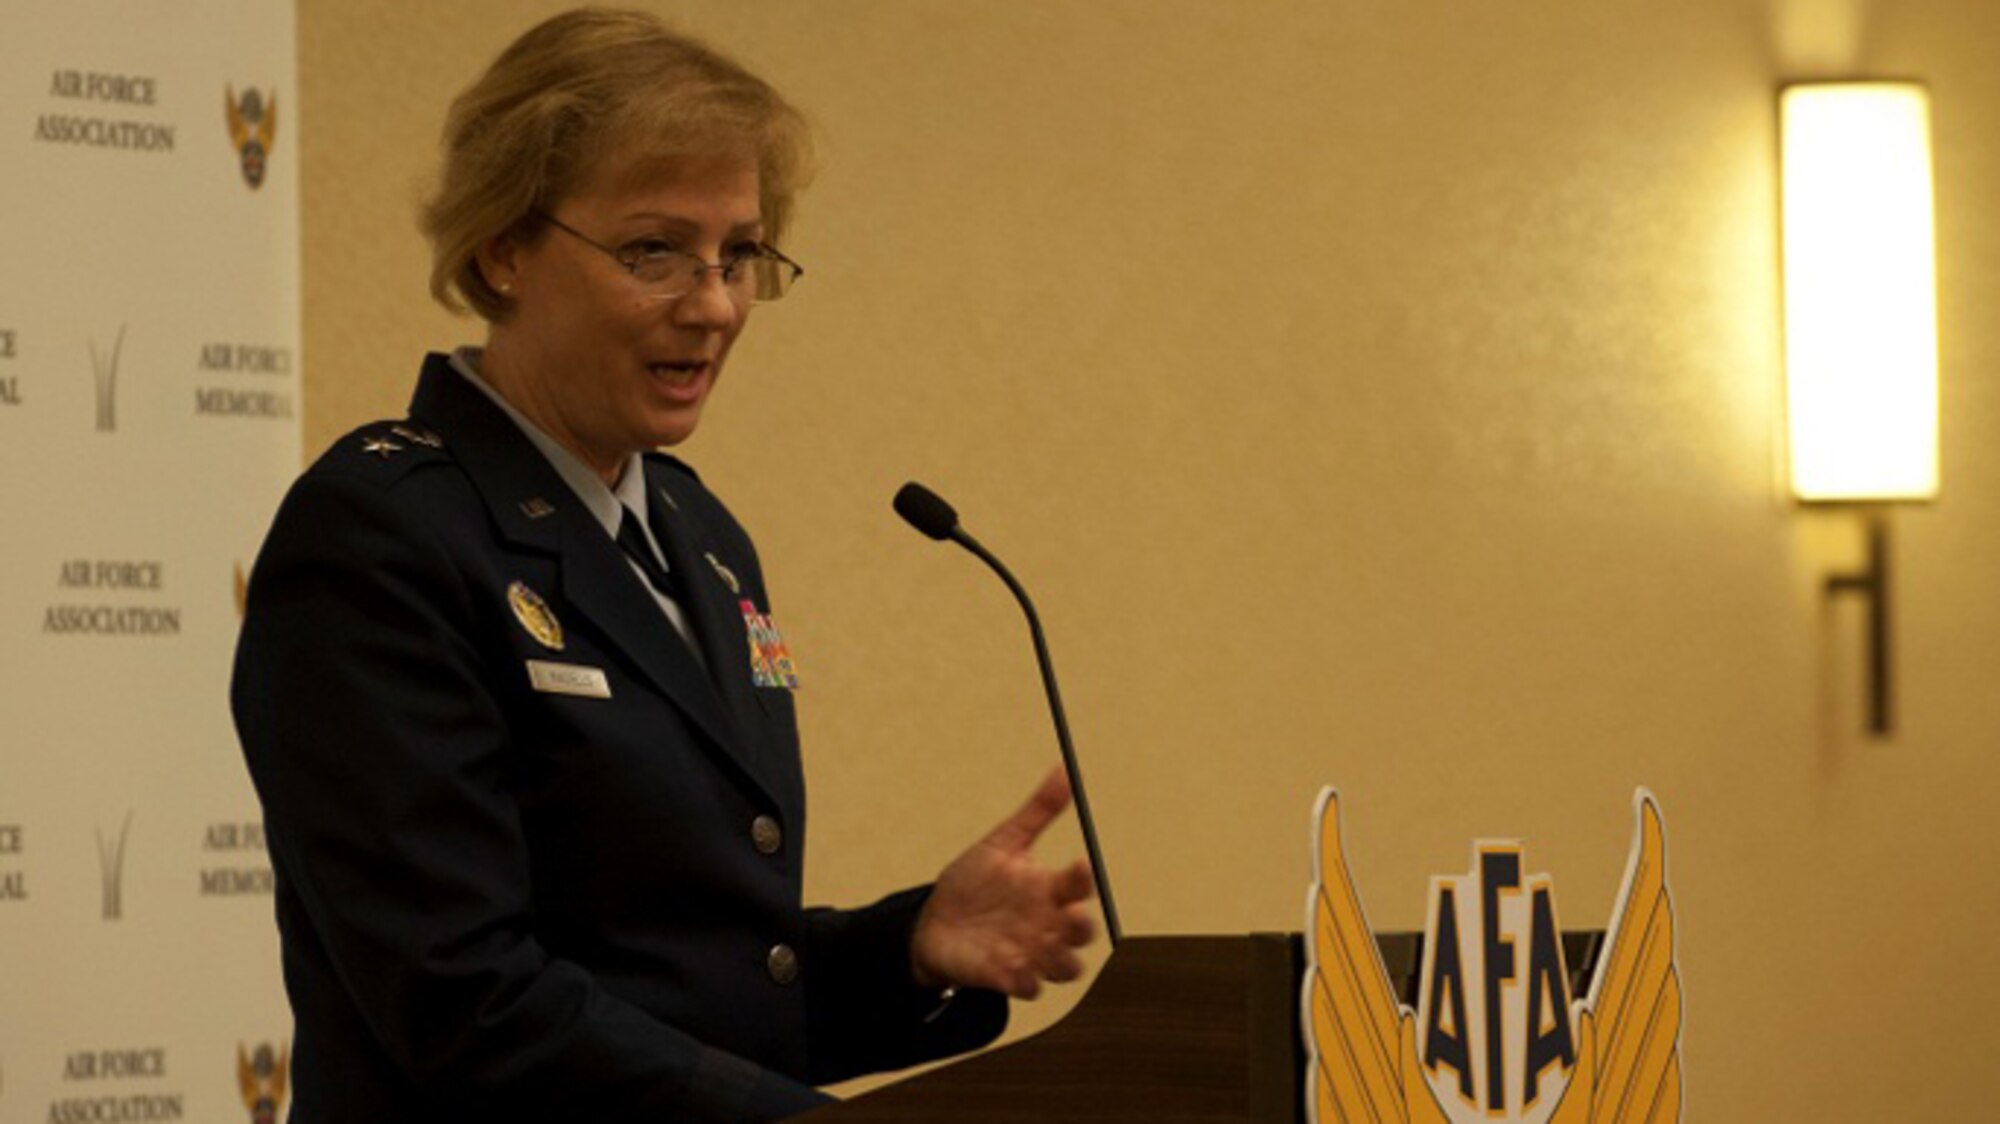 Maj. Gen. Wendy Masiello briefs attendees April 16, 2014, on how today's budget environment is driving change for both government and industry as part of the Air Force Association breakfast series in Arlington, Va. She said there have been
great examples recently in better buying power practices, especially in the reduction of overhead costs and "cleaning up" the proposal processes. Masiello is the deputy assistant secretary for contracting. (U.S. Air Force photo/Staff Sgt. Carlin Leslie)
